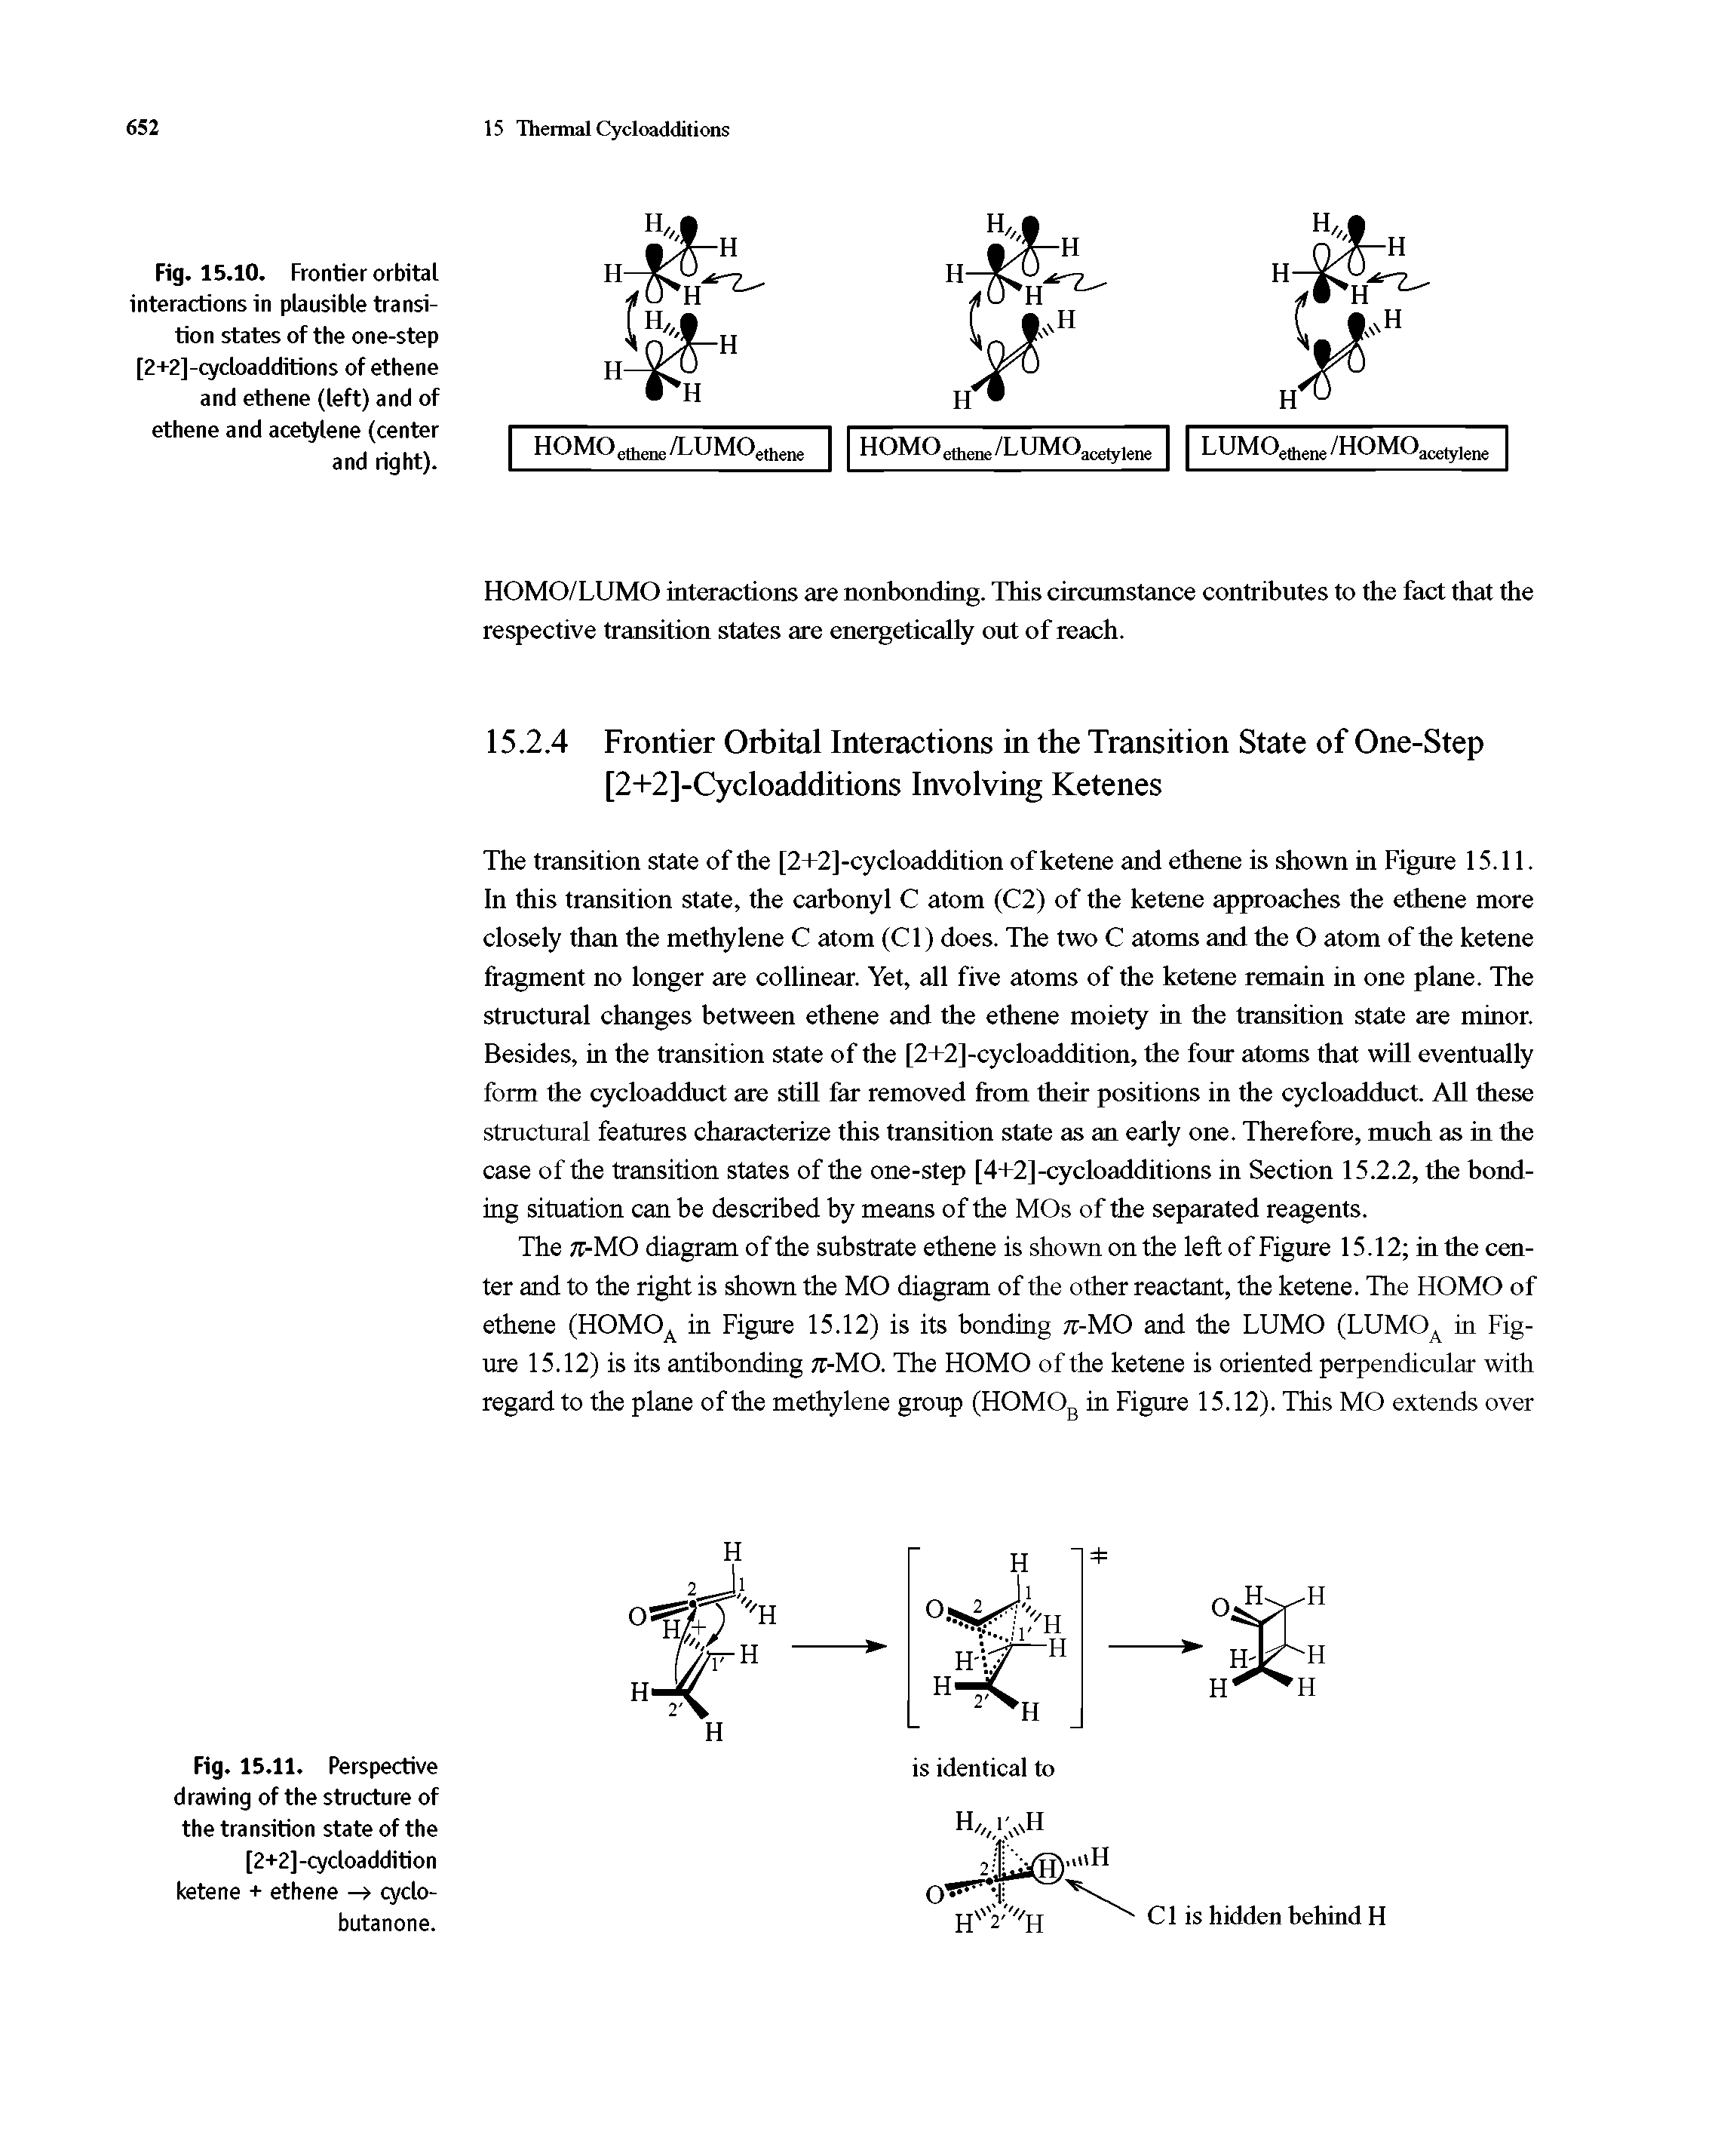 Fig. 15.10. Frontier orbital interactions in plausible transition states of the one-step [2+2]-cycloadditions of ethene and ethene (left) and of ethene and acetylene (center and right).